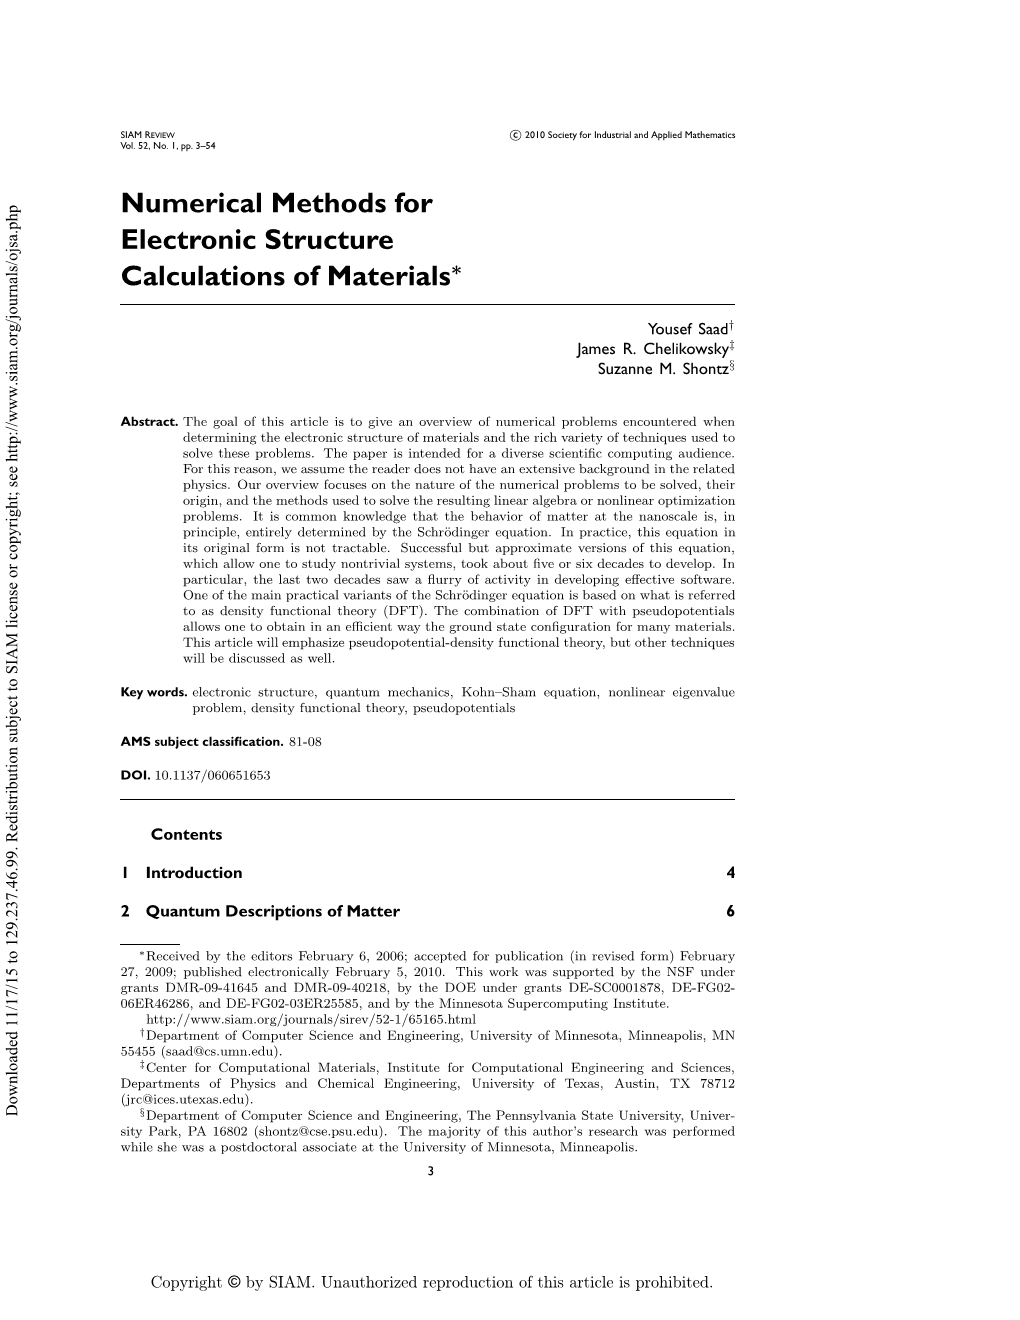 Numerical Methods for Electronic Structure